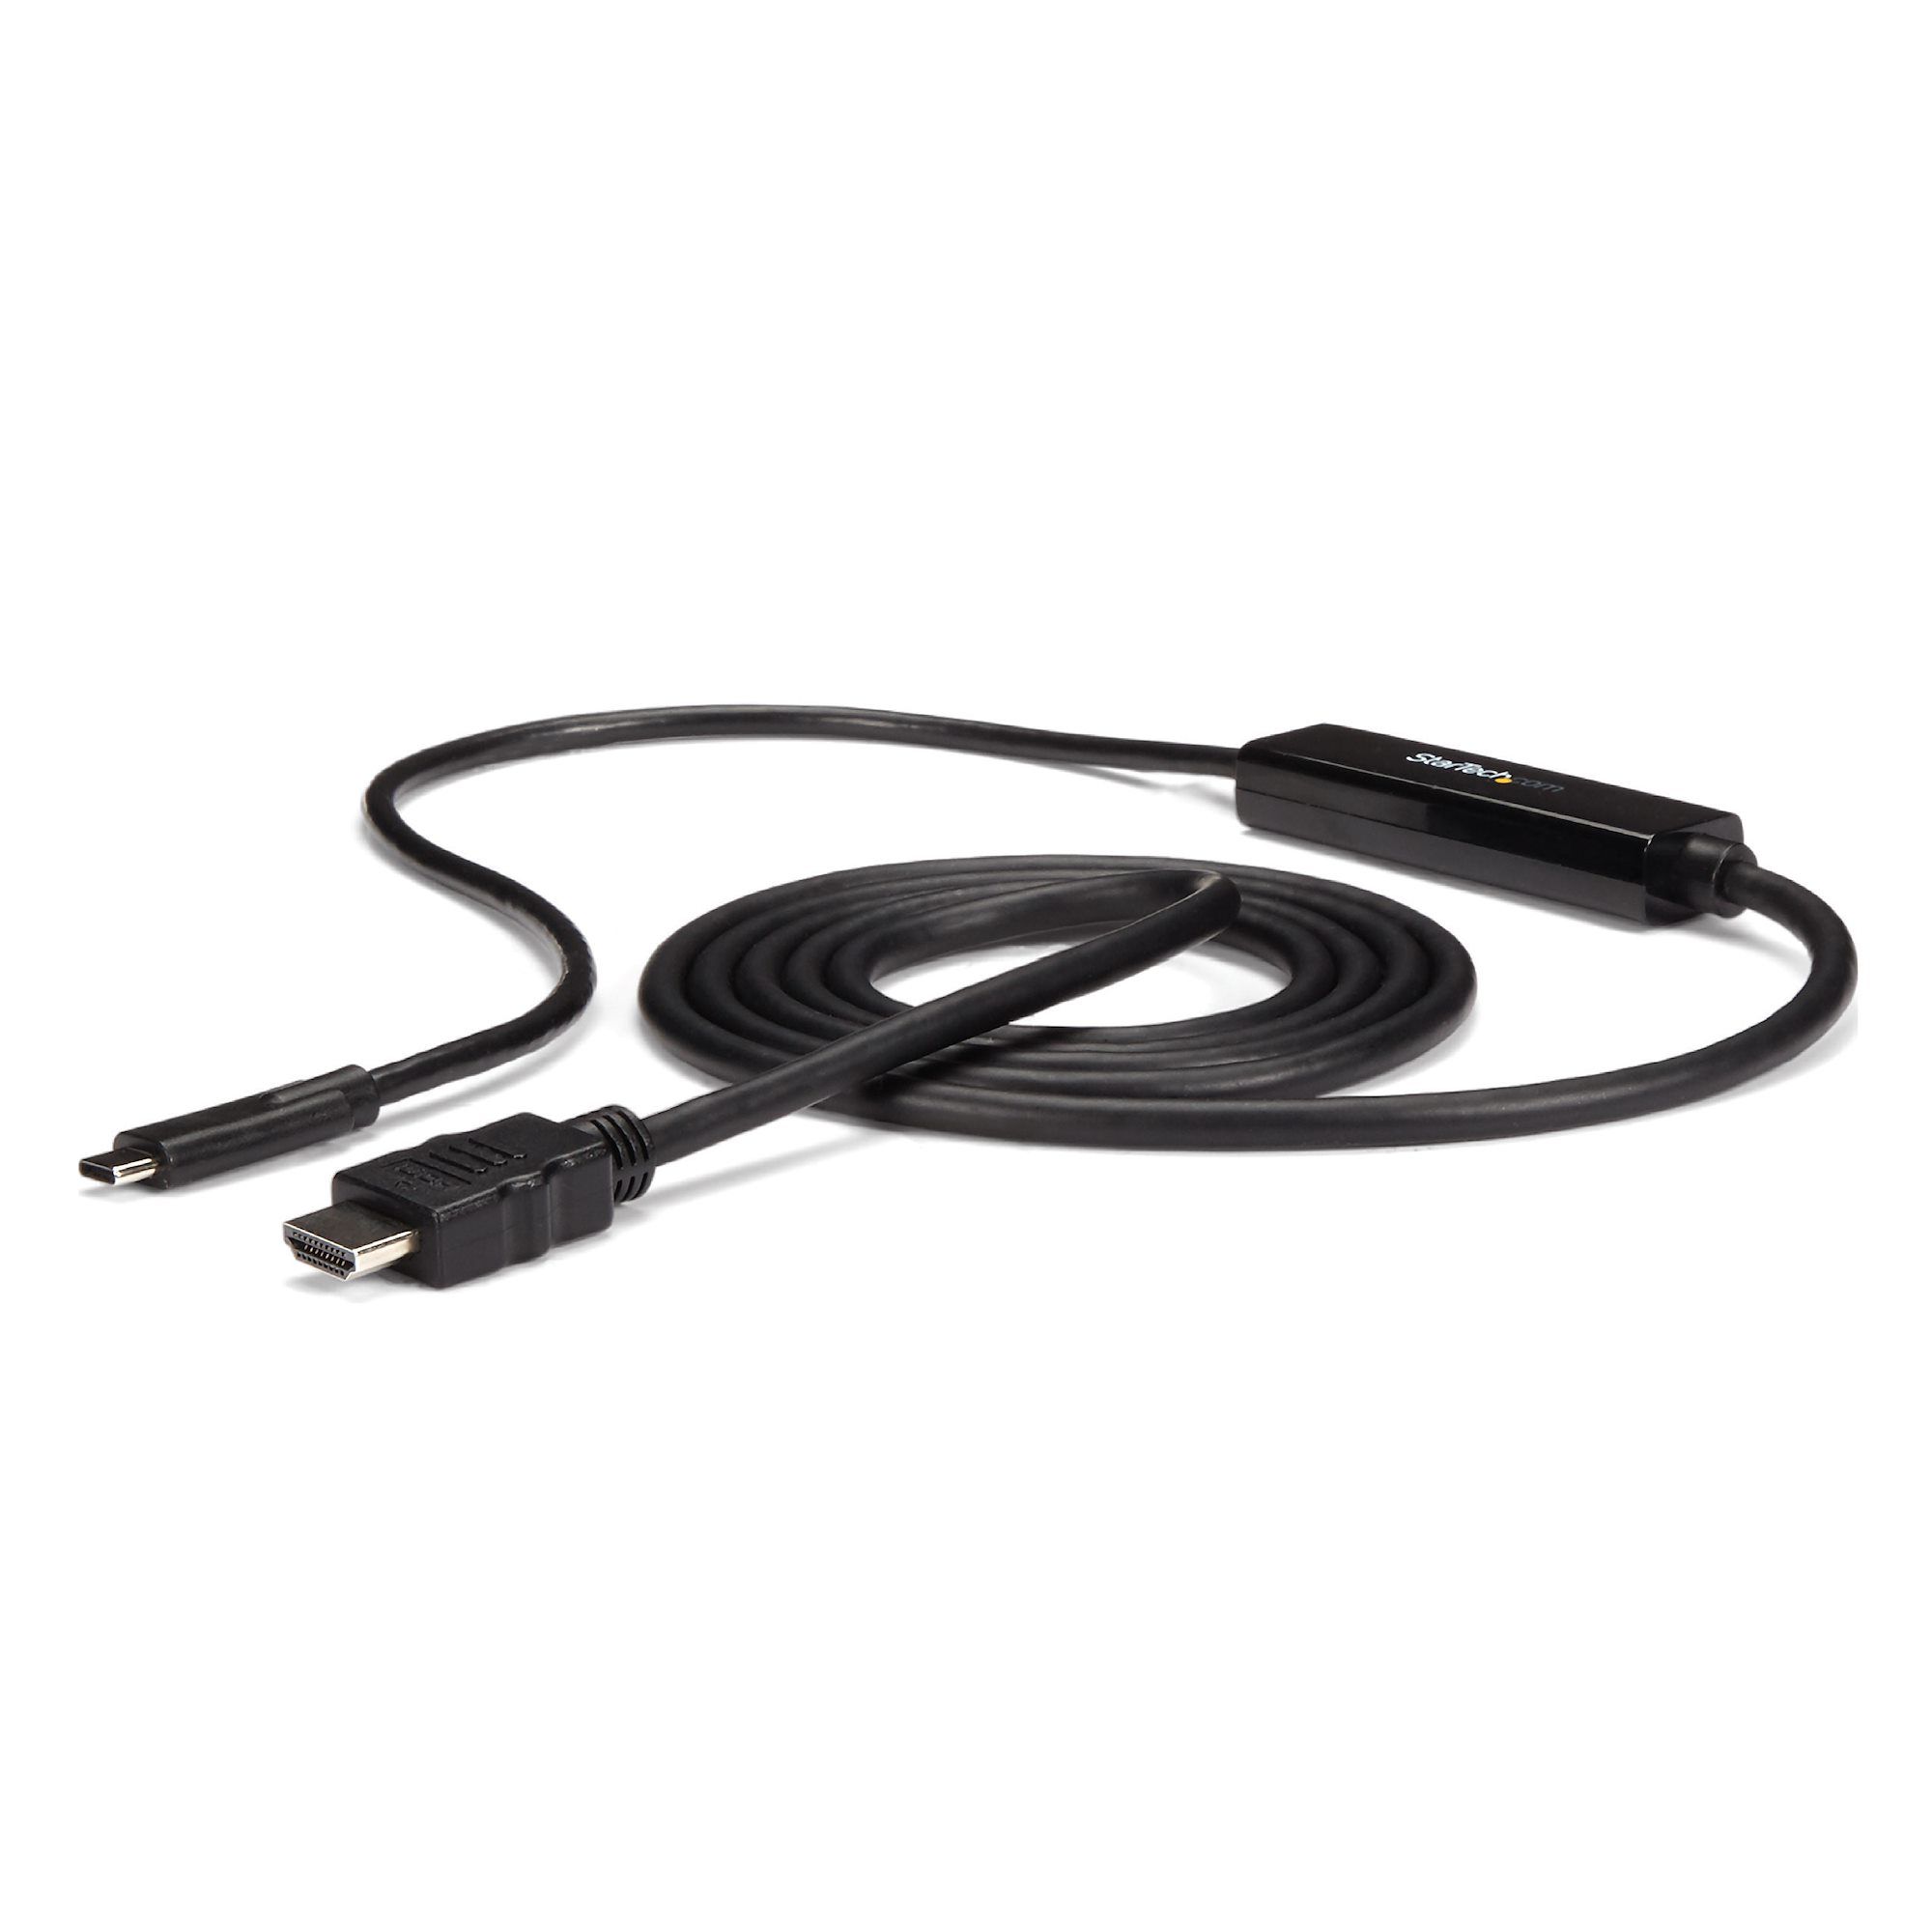 ³  /  Startech USB C to HDMI Cable